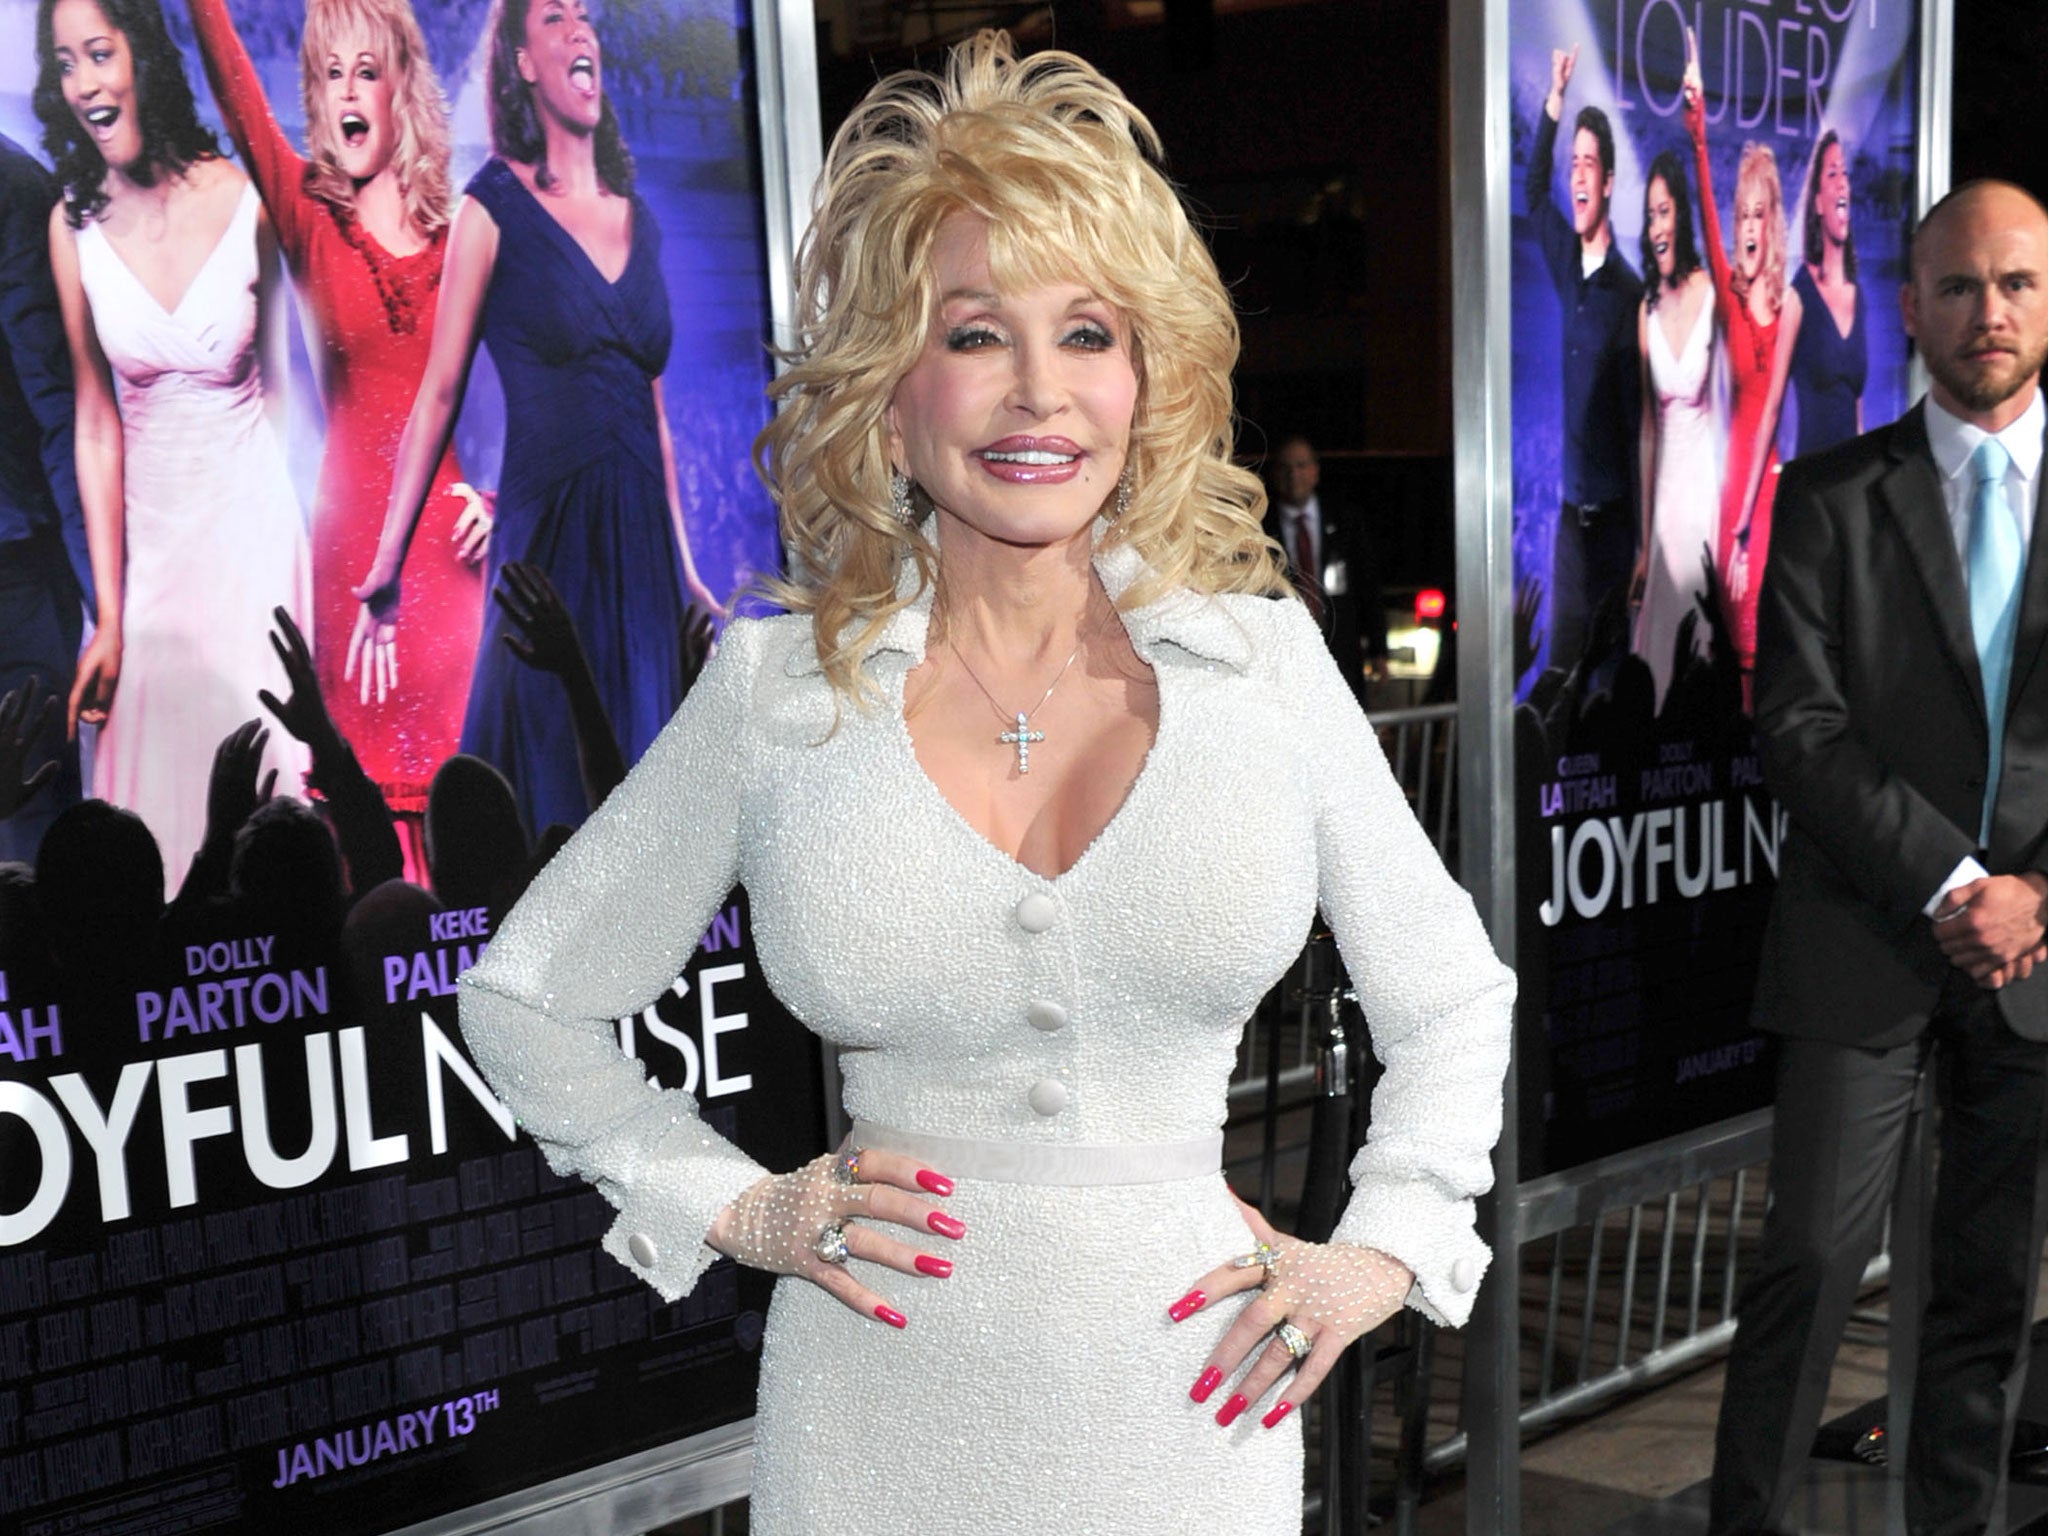 Dolly Parton, 67, was taken to hospital after being involved in a car crash